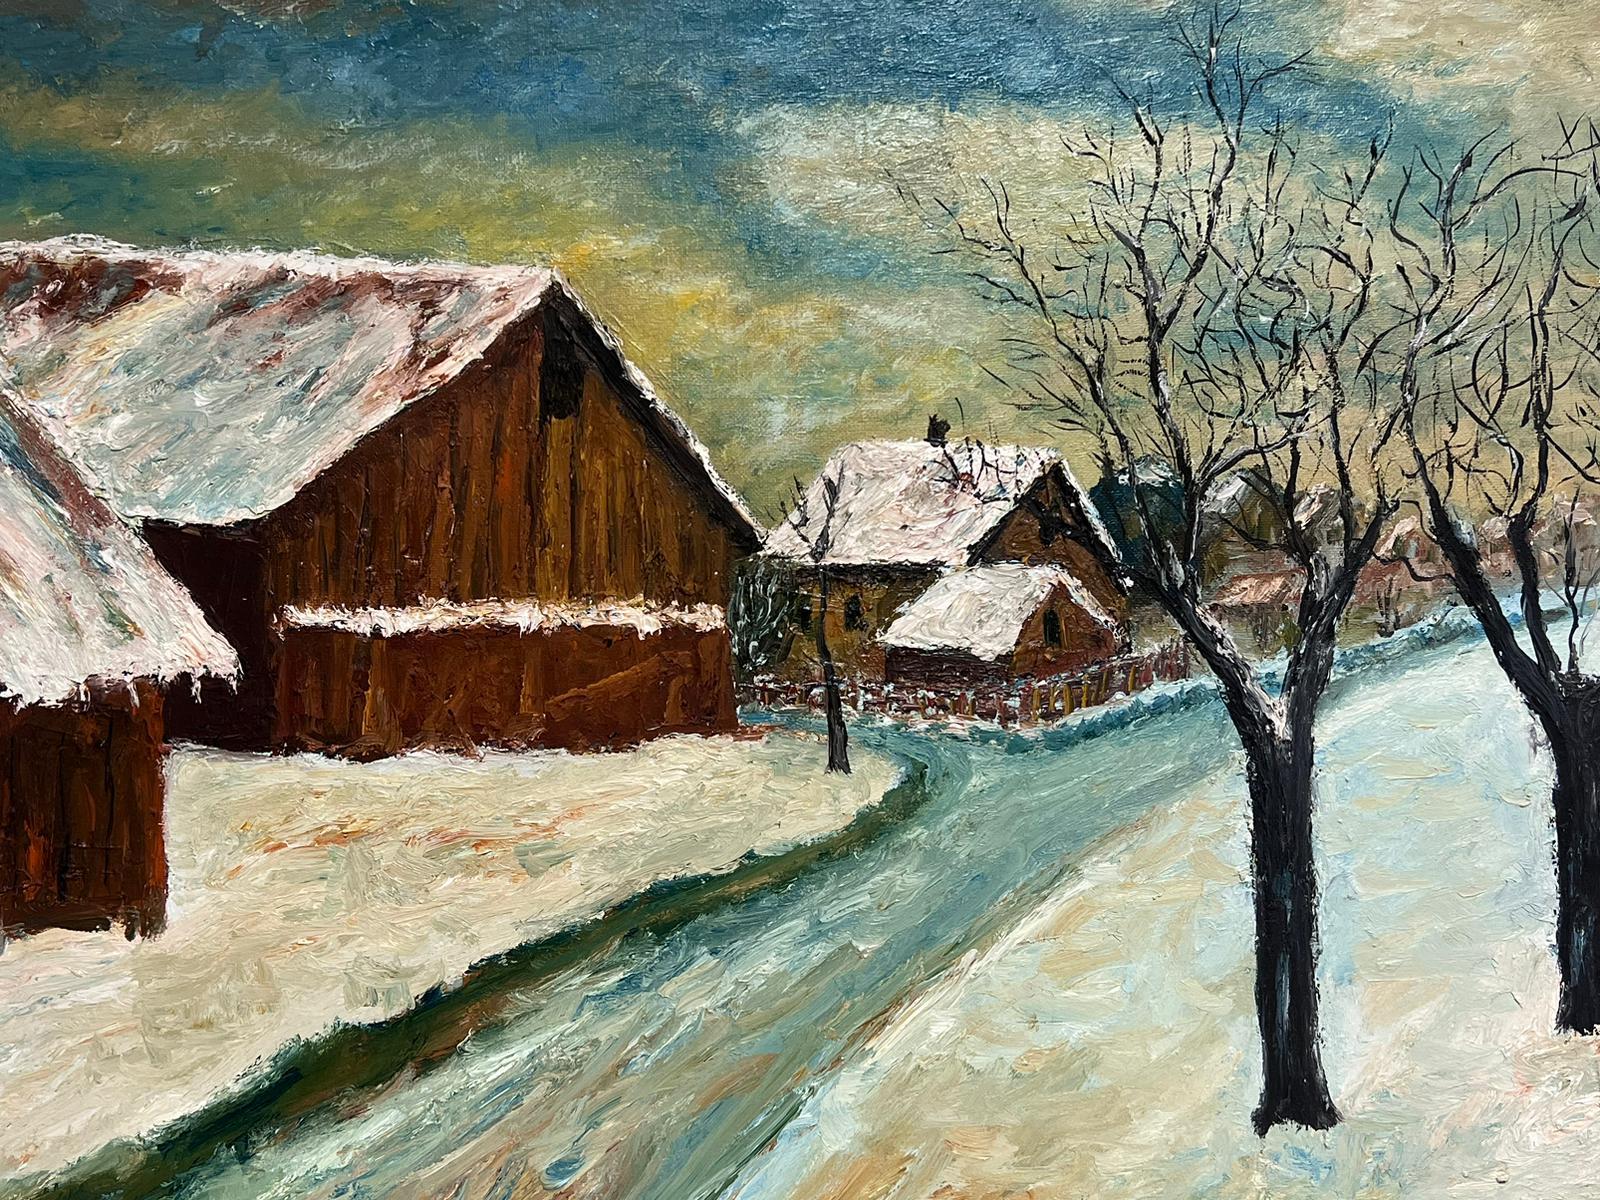 Winter
by Fernand Audet (French, Tarascon 1923- Mulhouse 2016)
oil painting on canvas, unframed

painting: 24 x 29 inches

A fine 20th centuryoil painting by the listed French Impressionist artist, Fernand Audet (1923-2016). Painted with wonderful